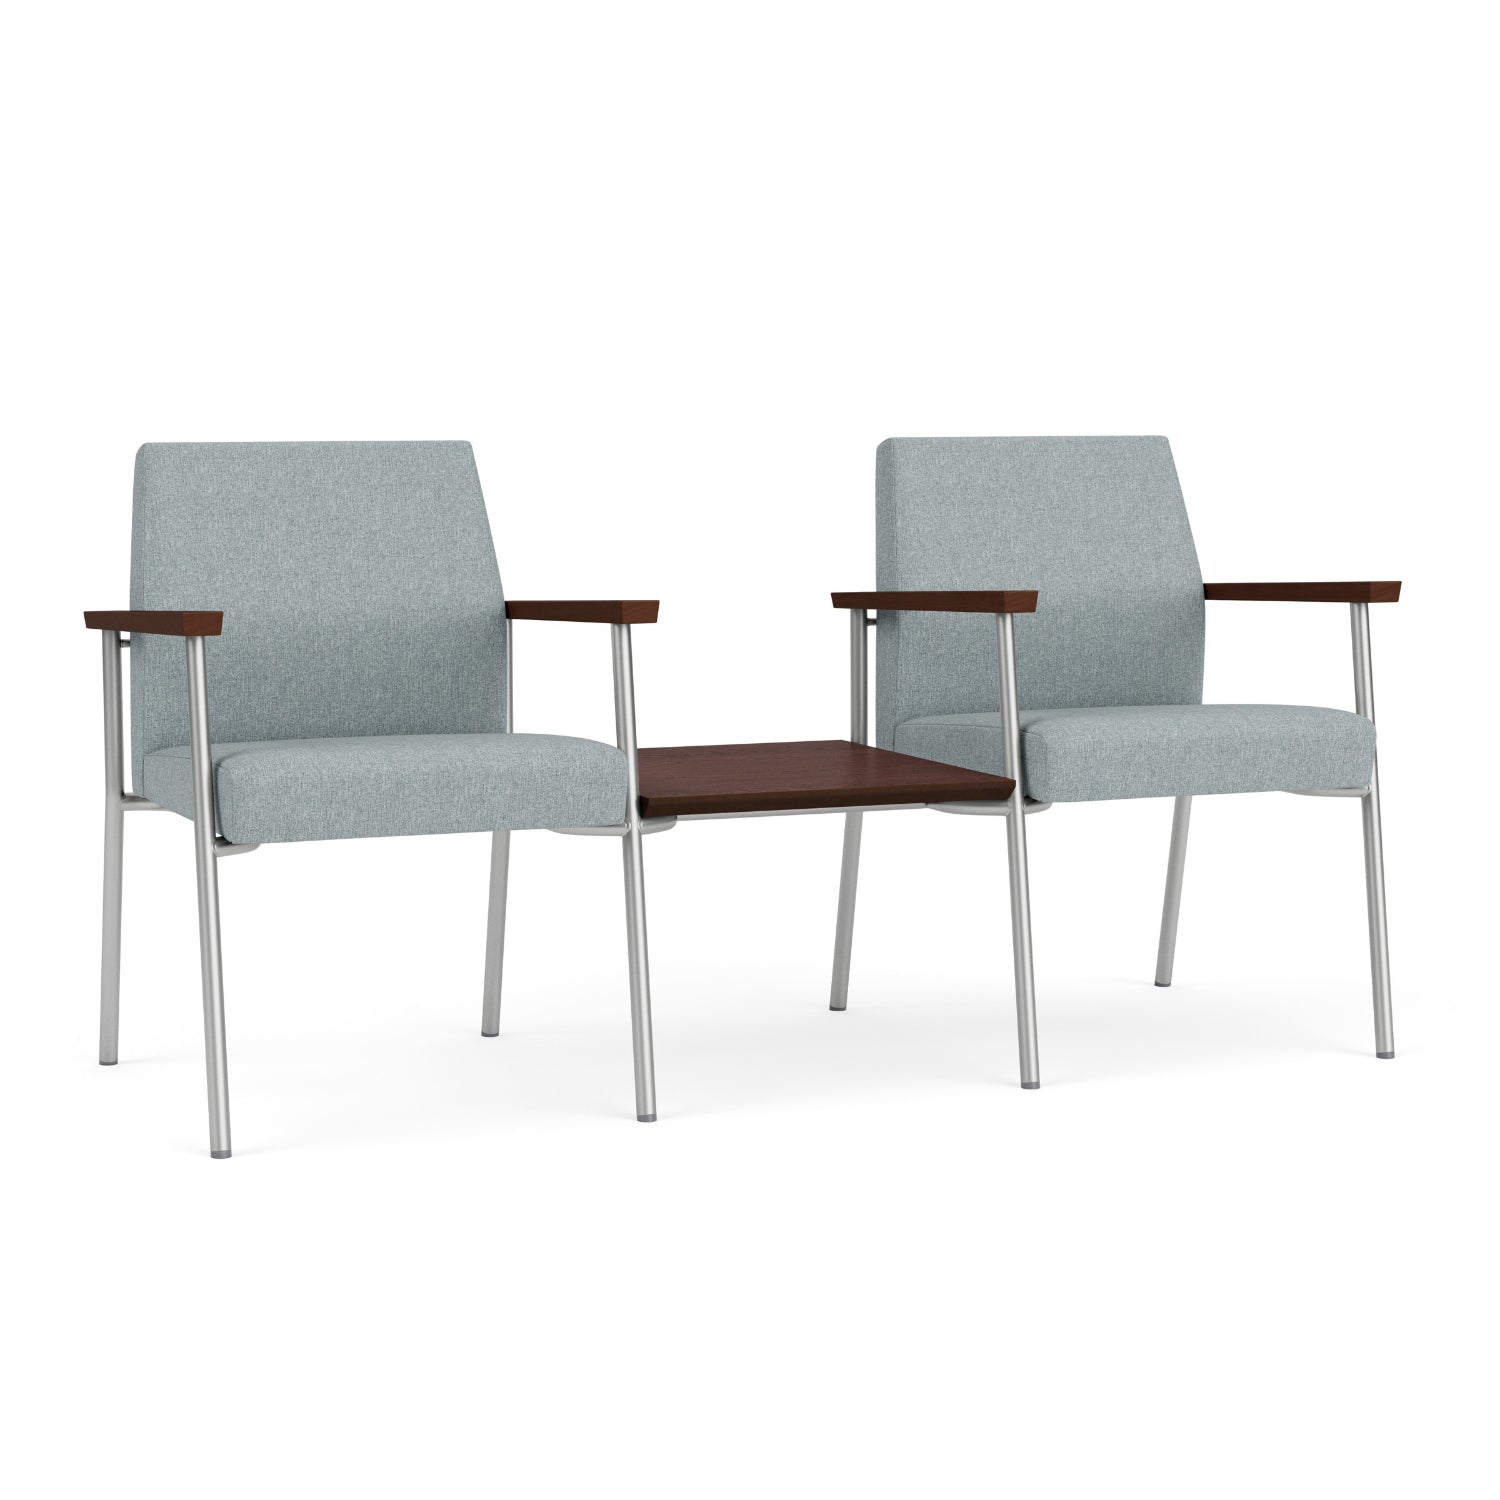 Mystic Guest Collection Reception Seating, 2 Chairs with Connecting Center Table, Healthcare Vinyl Upholstery, FREE SHIPPING